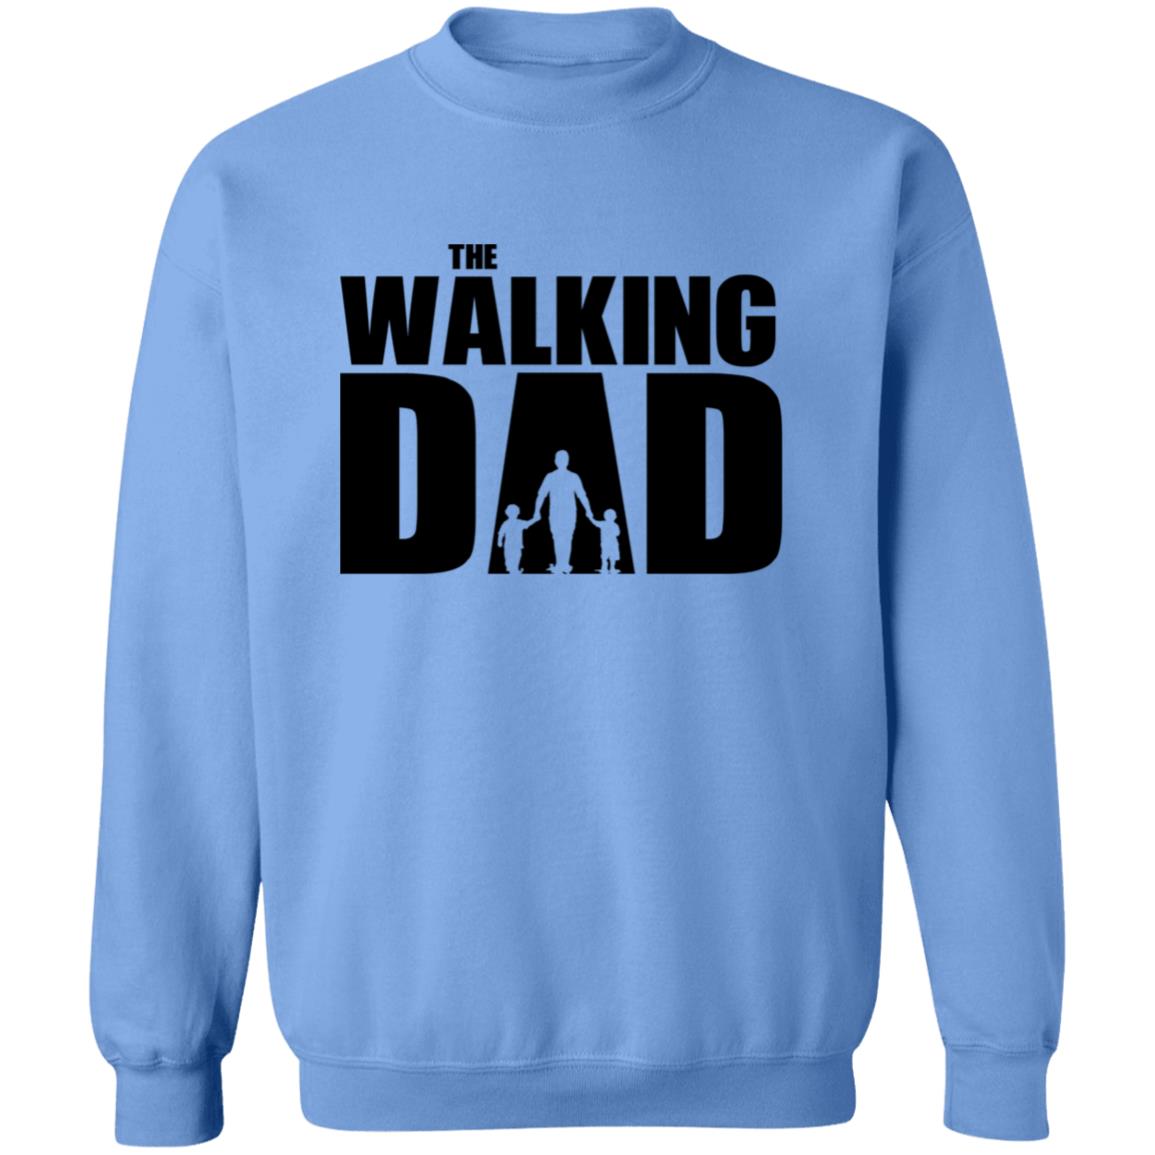 The Walking Dad of 2